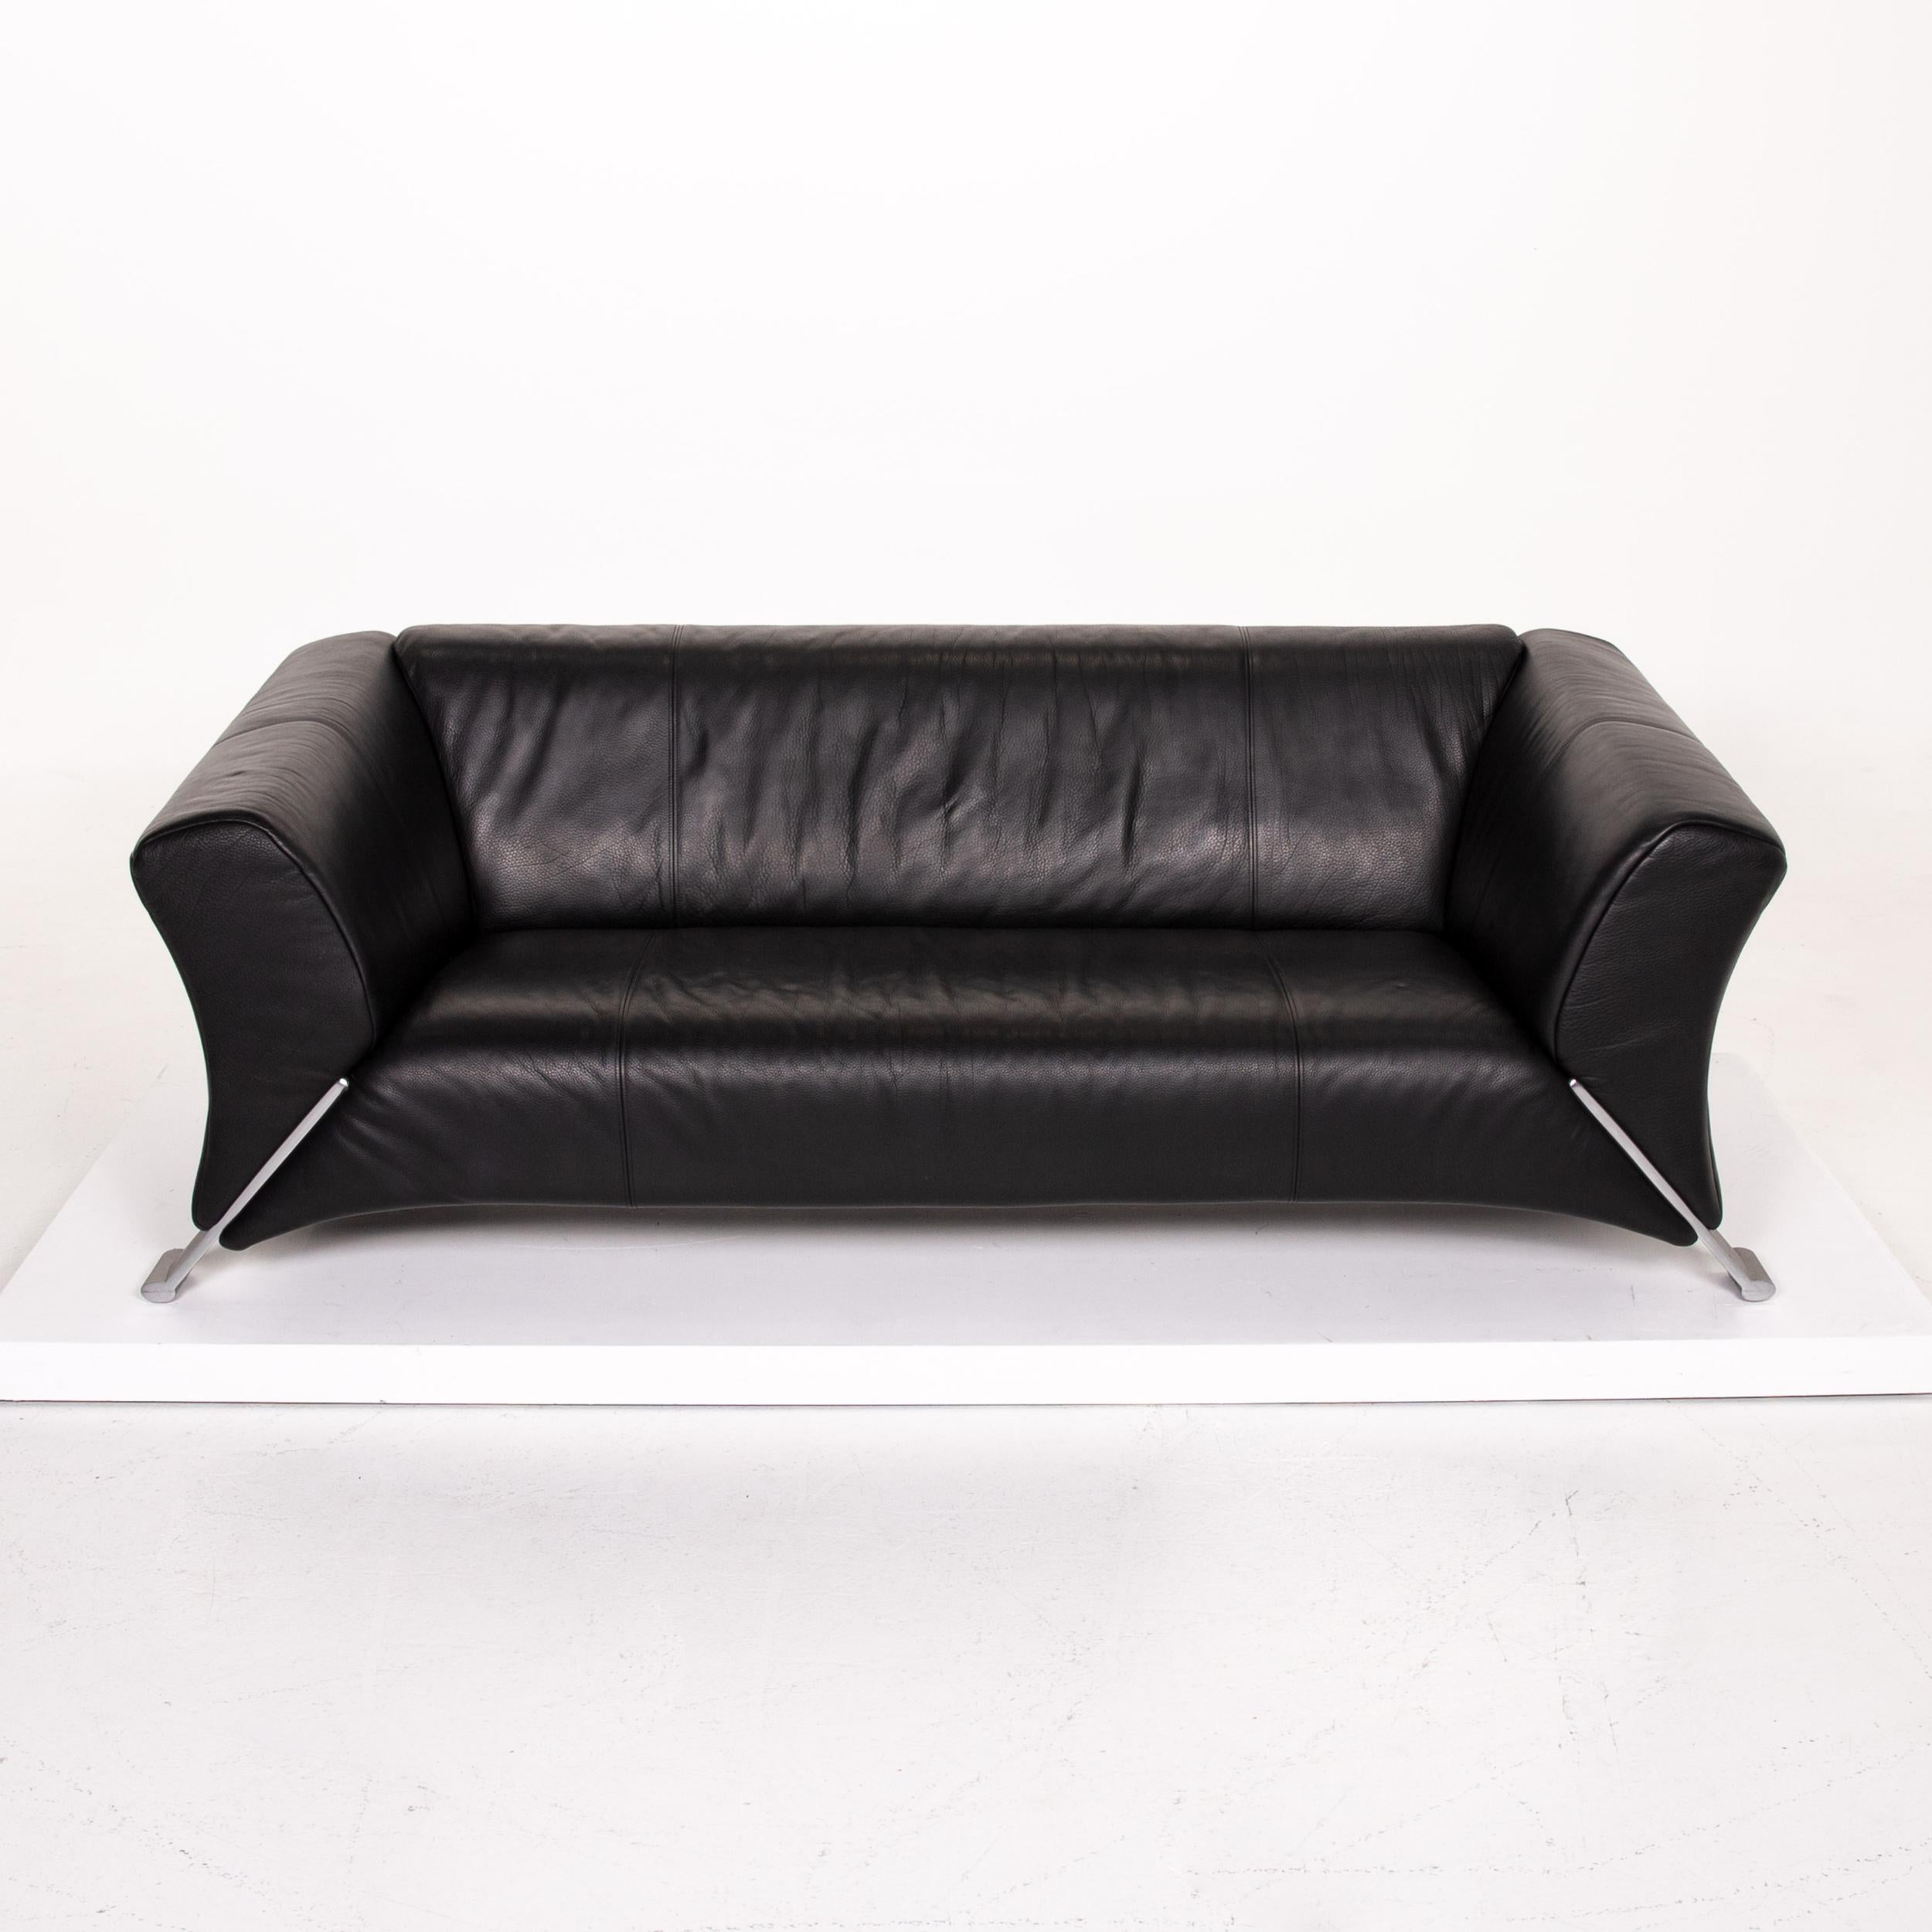 Rolf Benz 322 Leather Sofa Black Three-Seat Couch For Sale 2